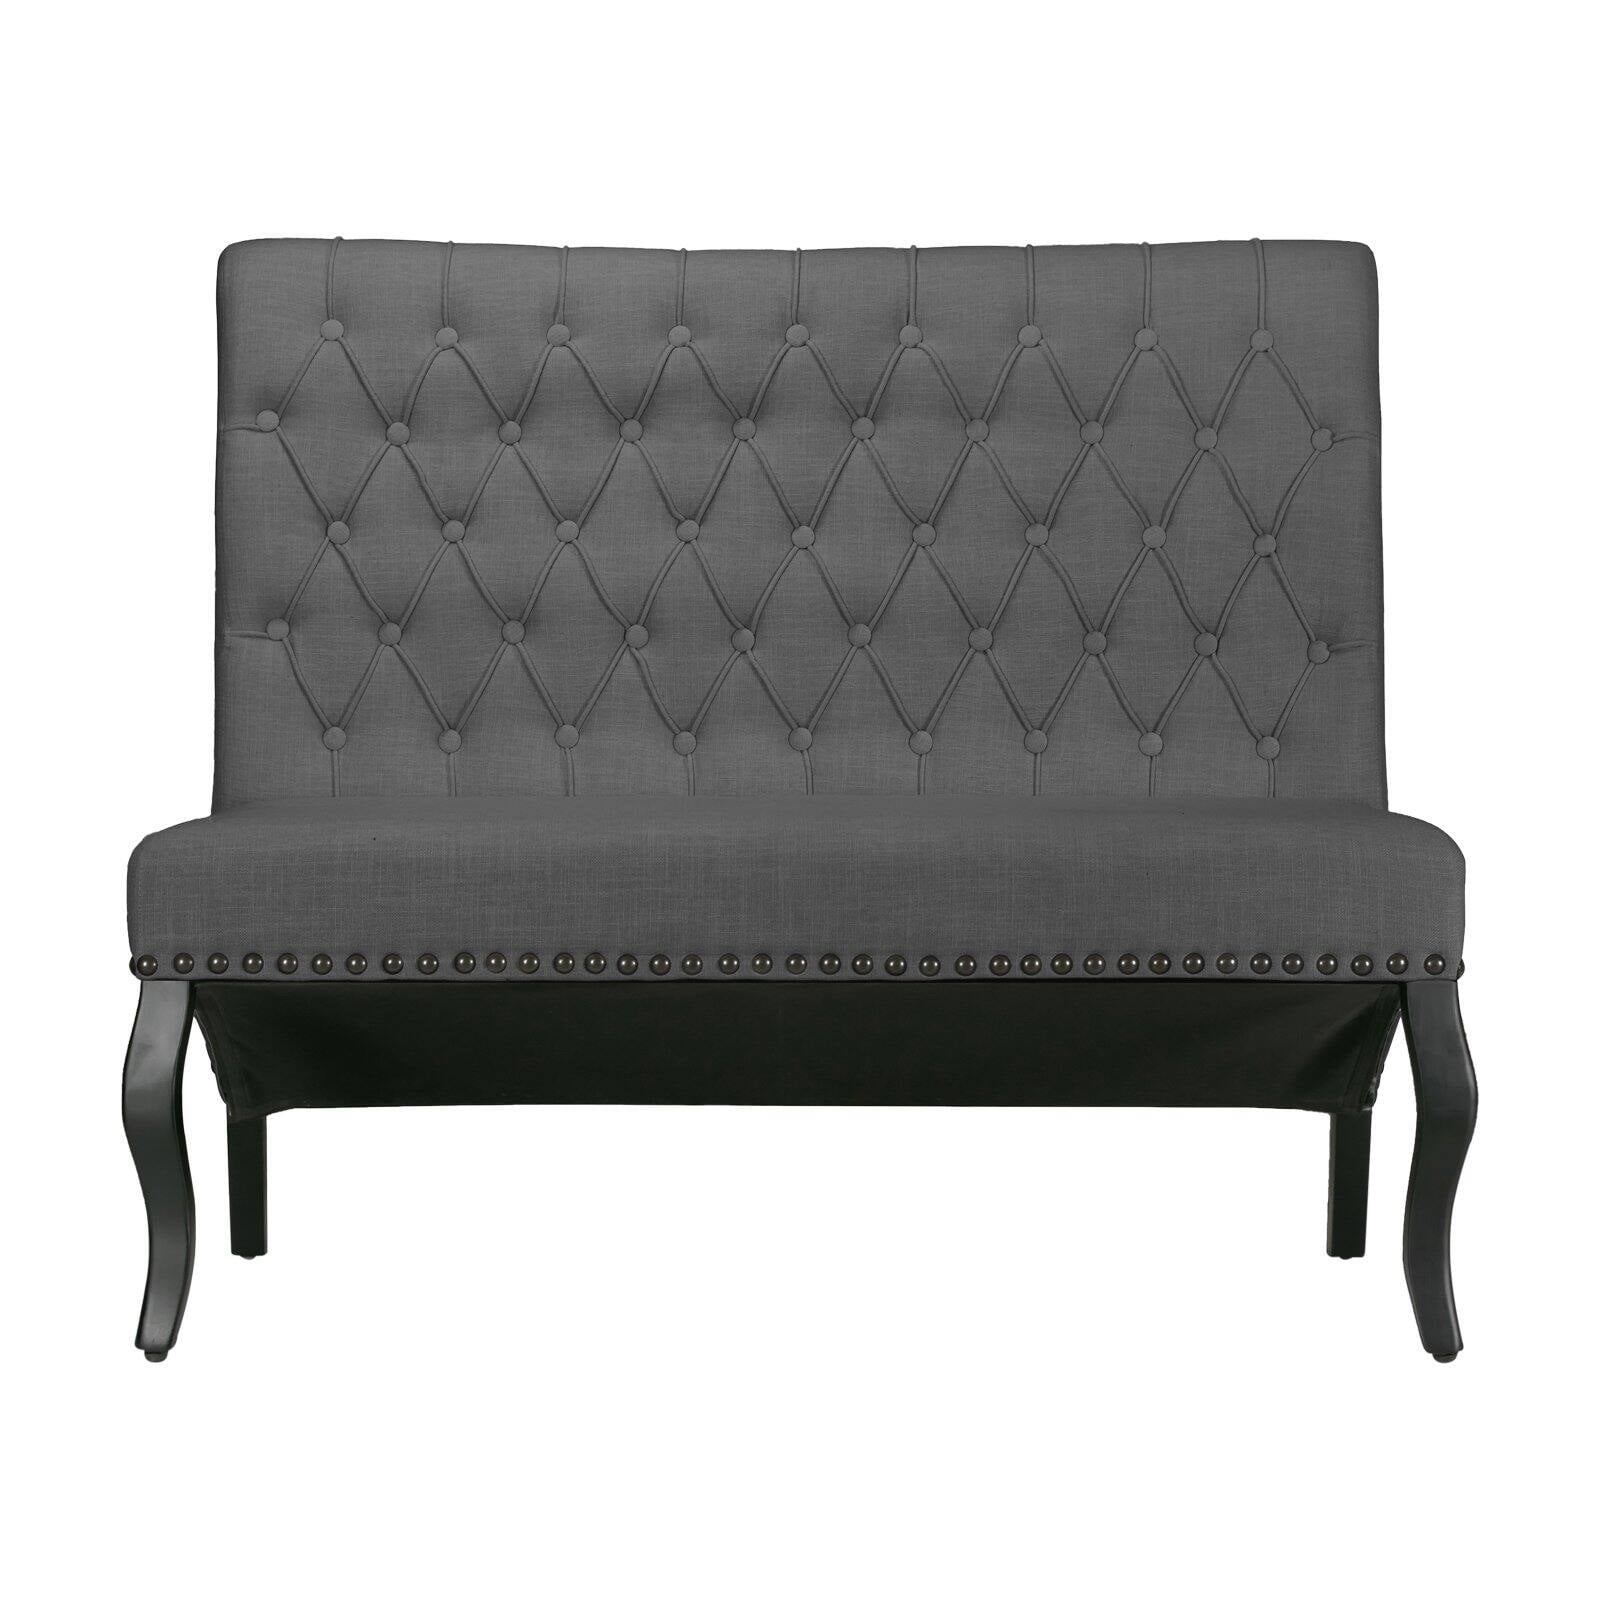 Glamour Home Alisa Settee Banquette Bench Loveseat